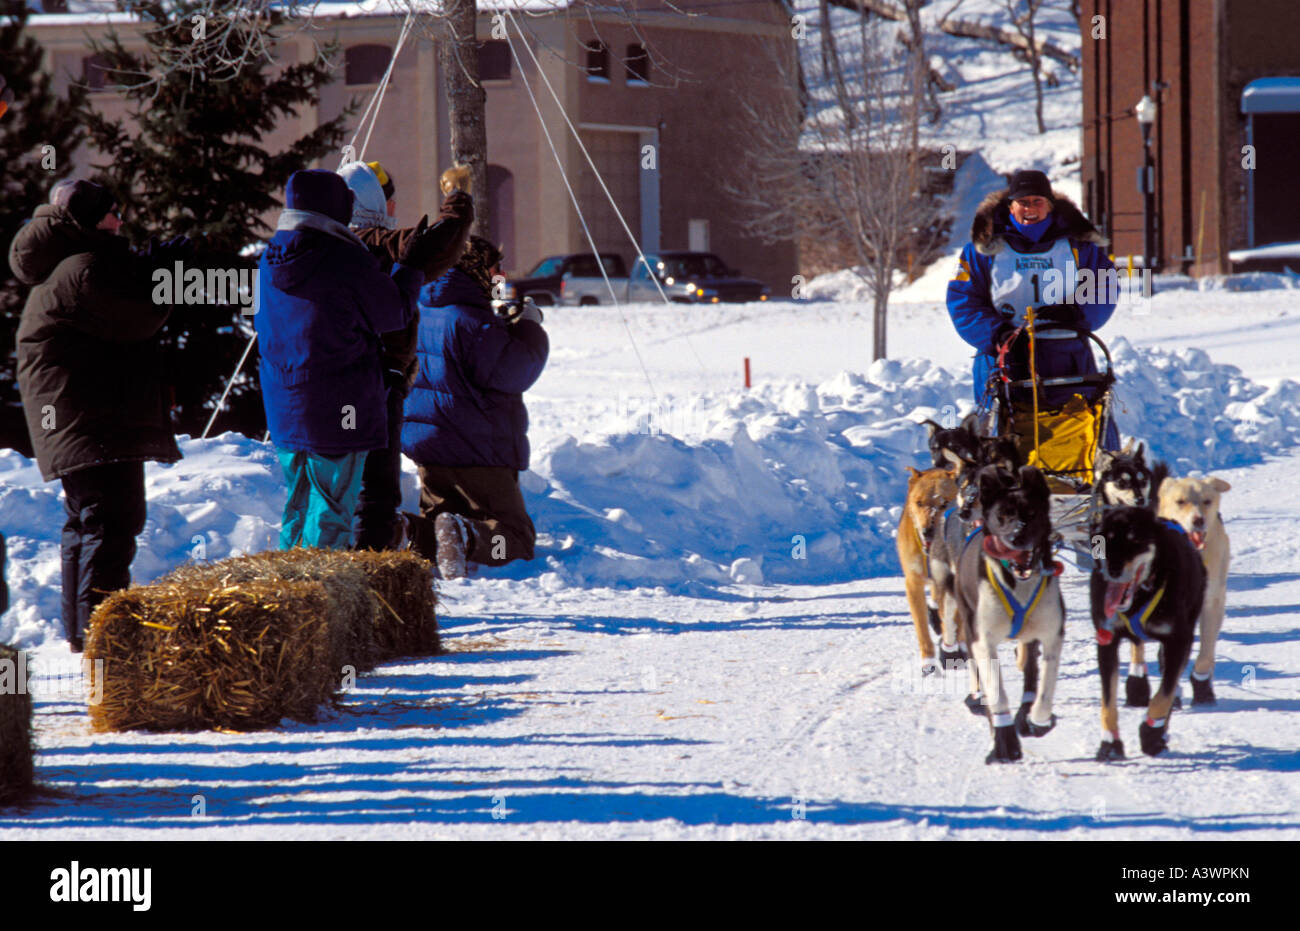 SPECTATORS WATCH AS A MUSHER AND TEAM FINISH THE U P 200 SLED DOG RACE IN MARQUETTE MICHIGAN Stock Photo